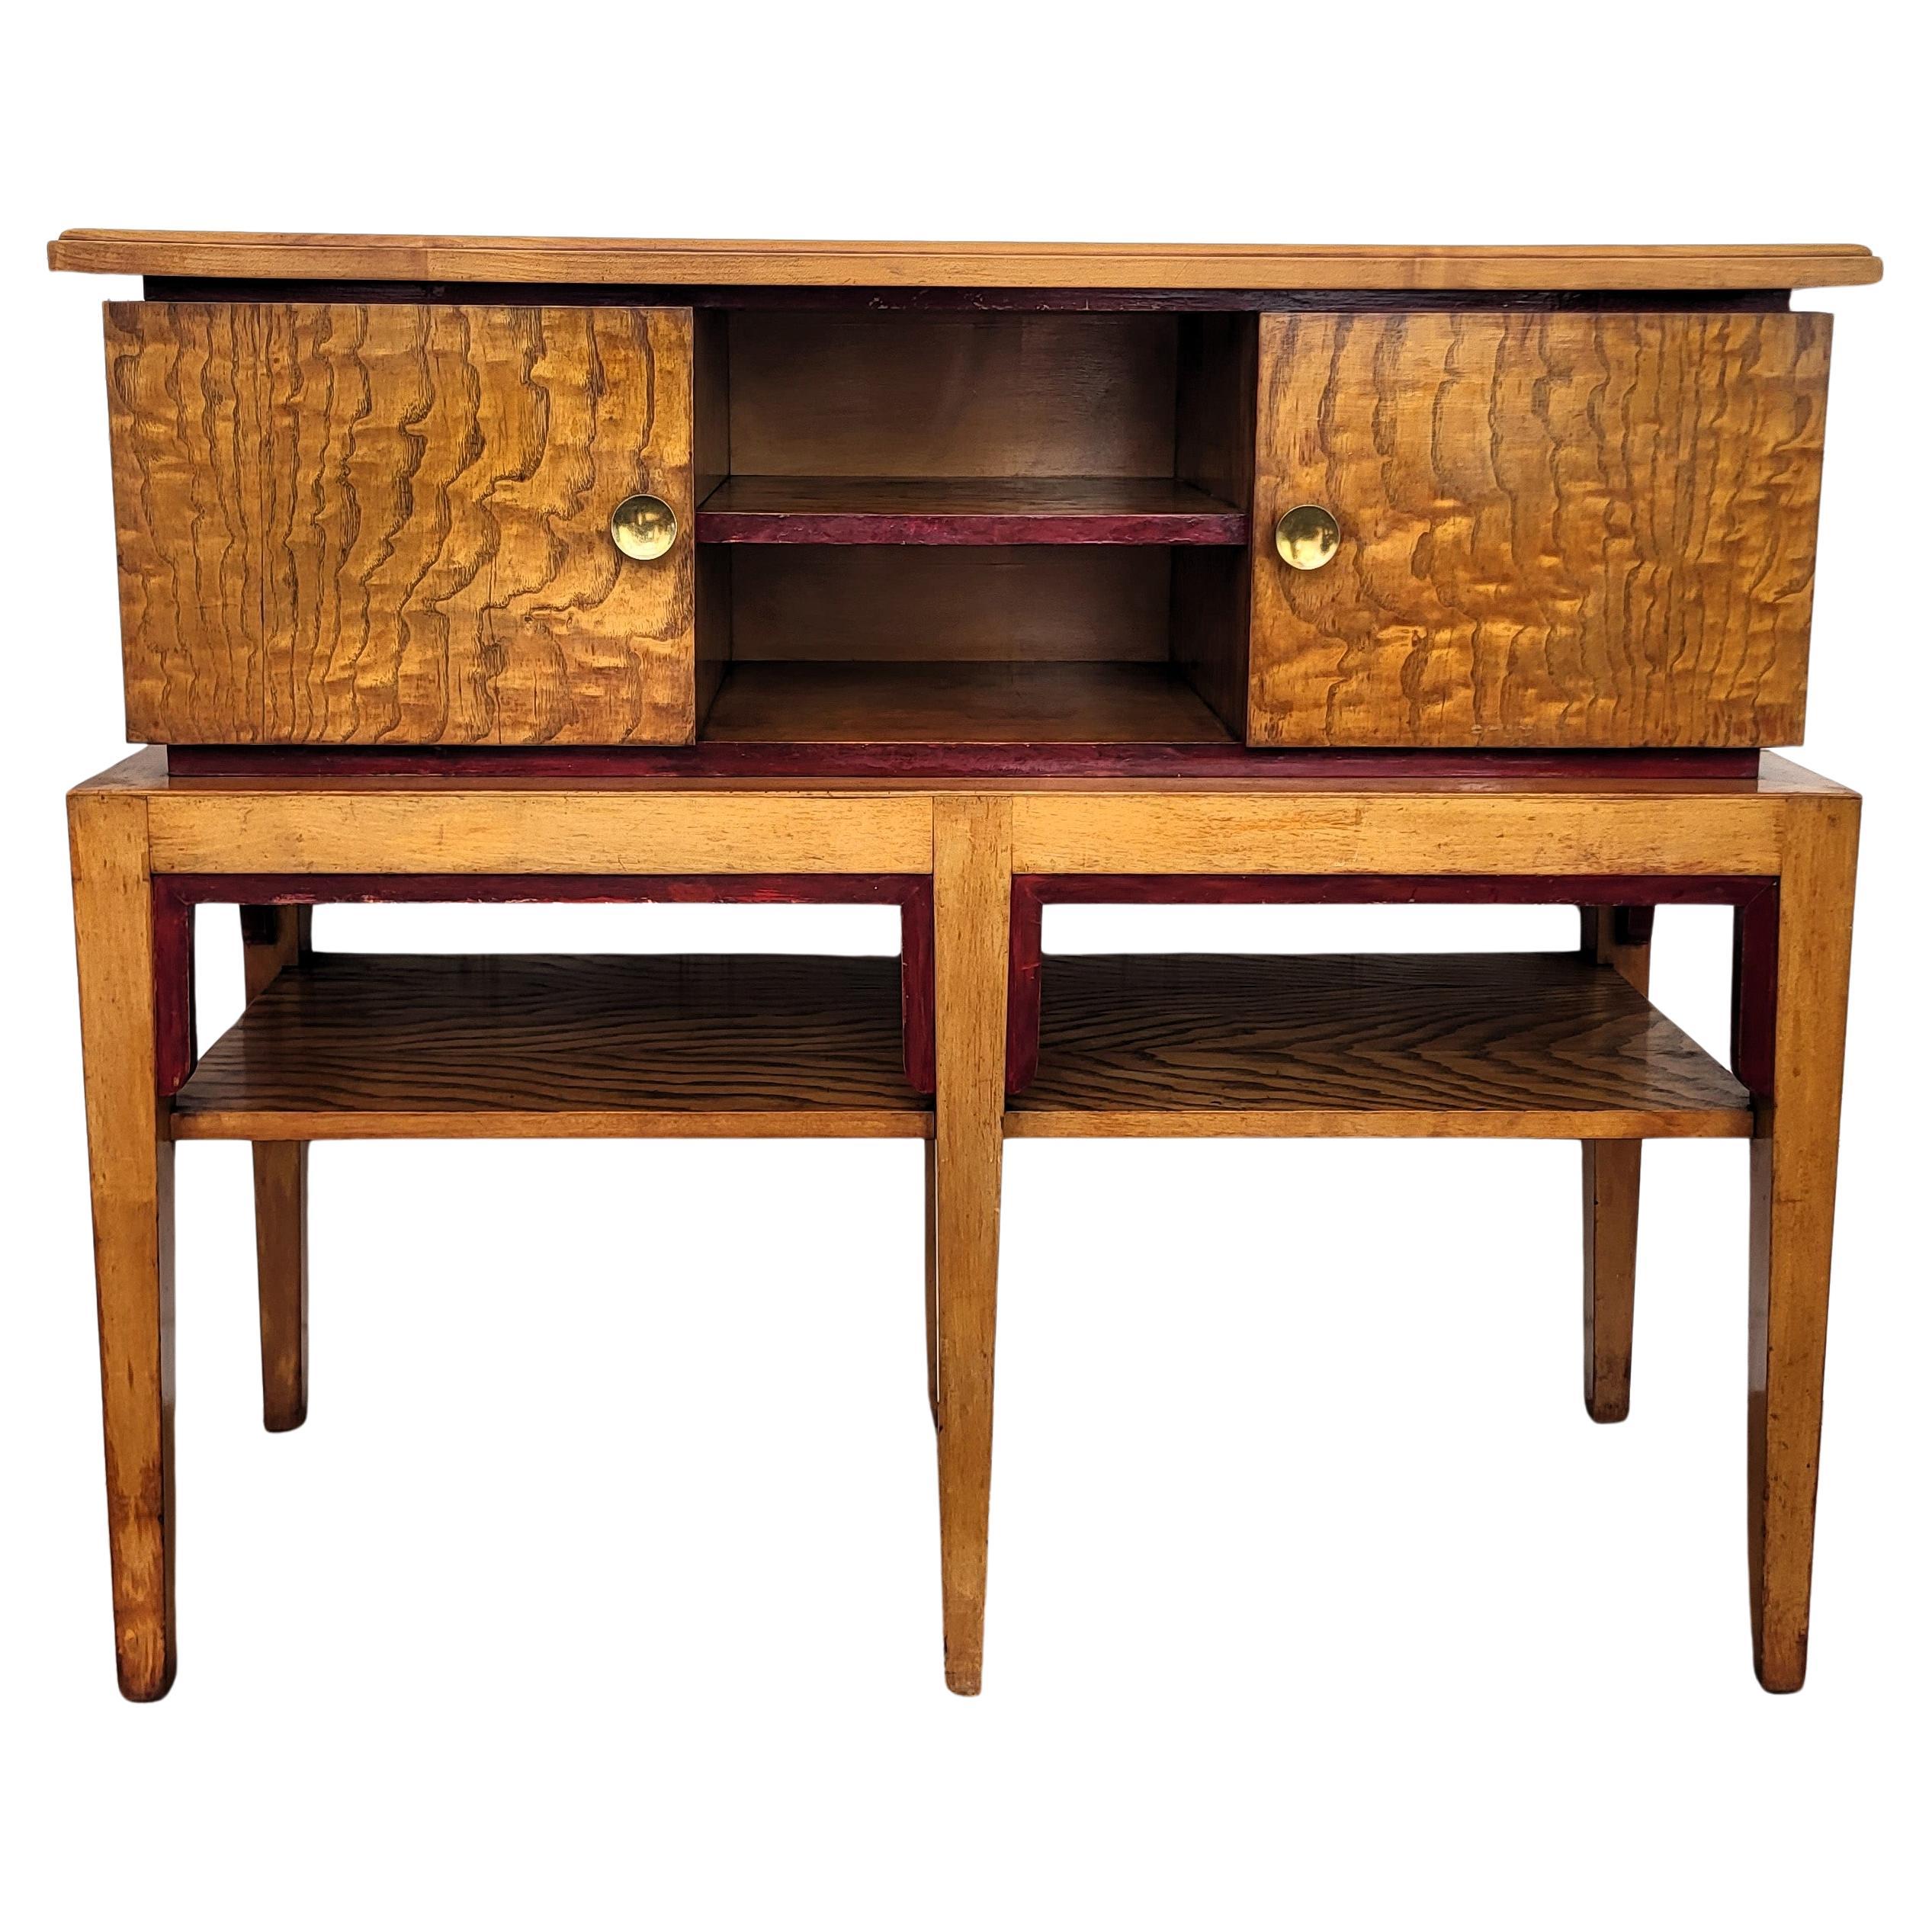 1970s Mid-Century Regency Italian Wood and Brass Consolle Sideboard For Sale